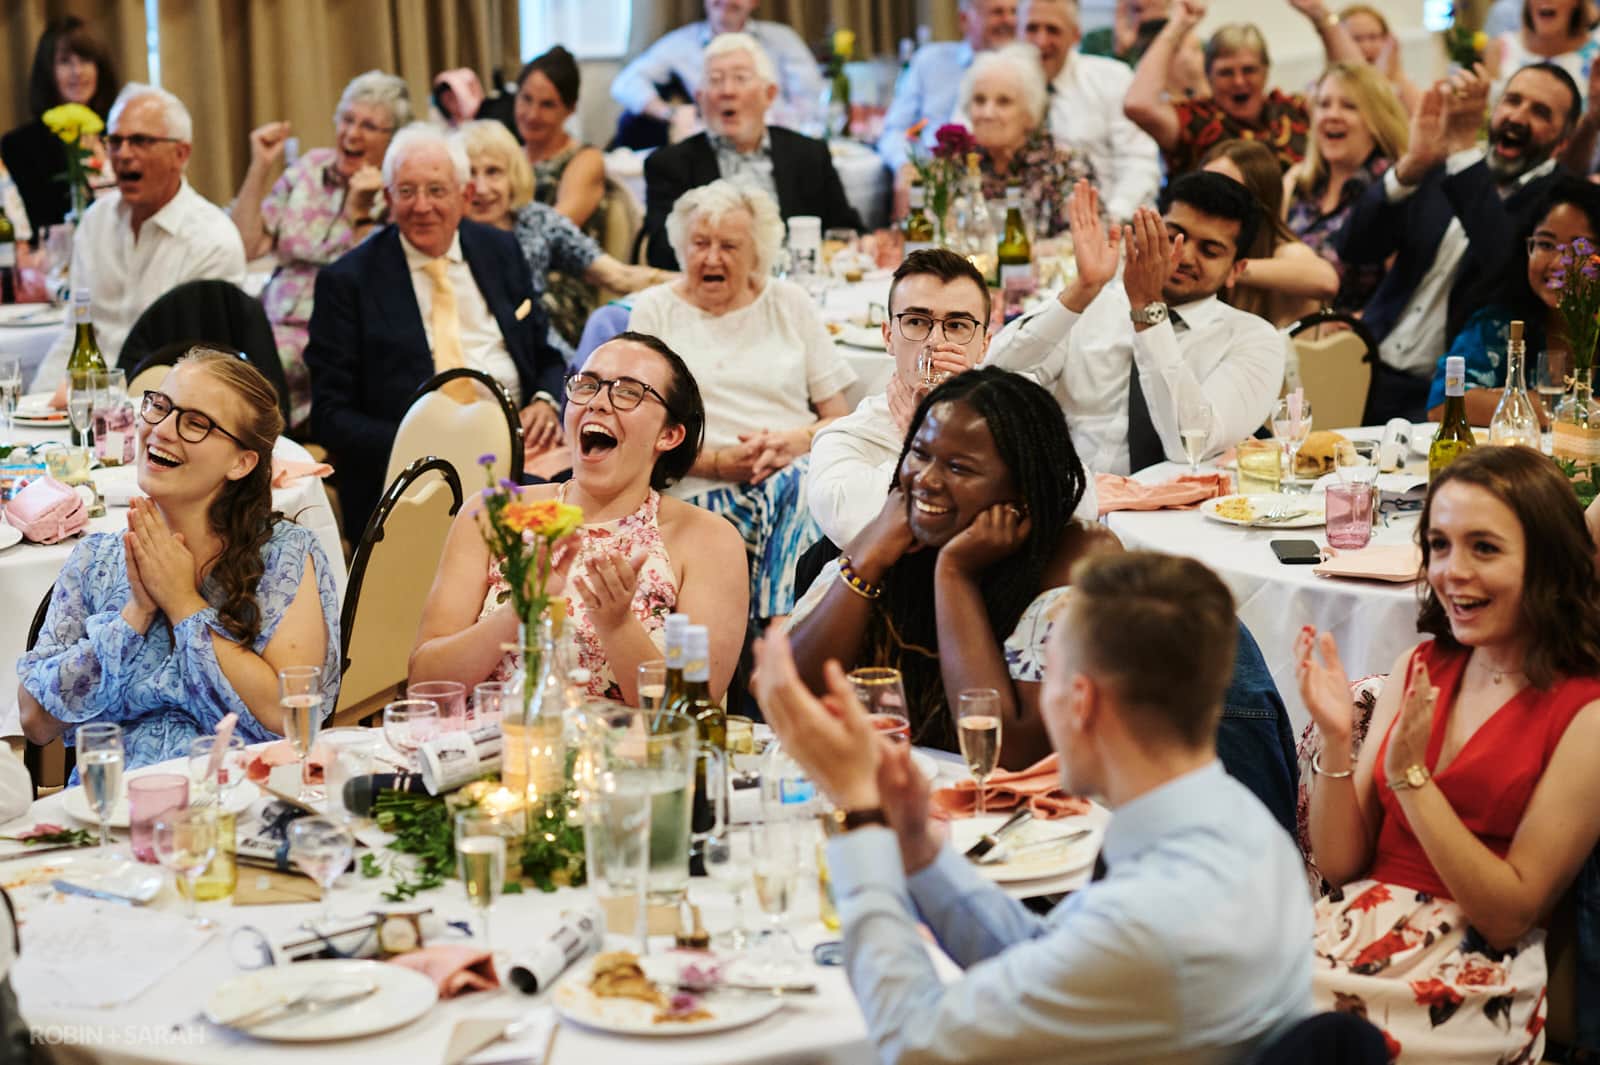 Wedding guests react to speeches